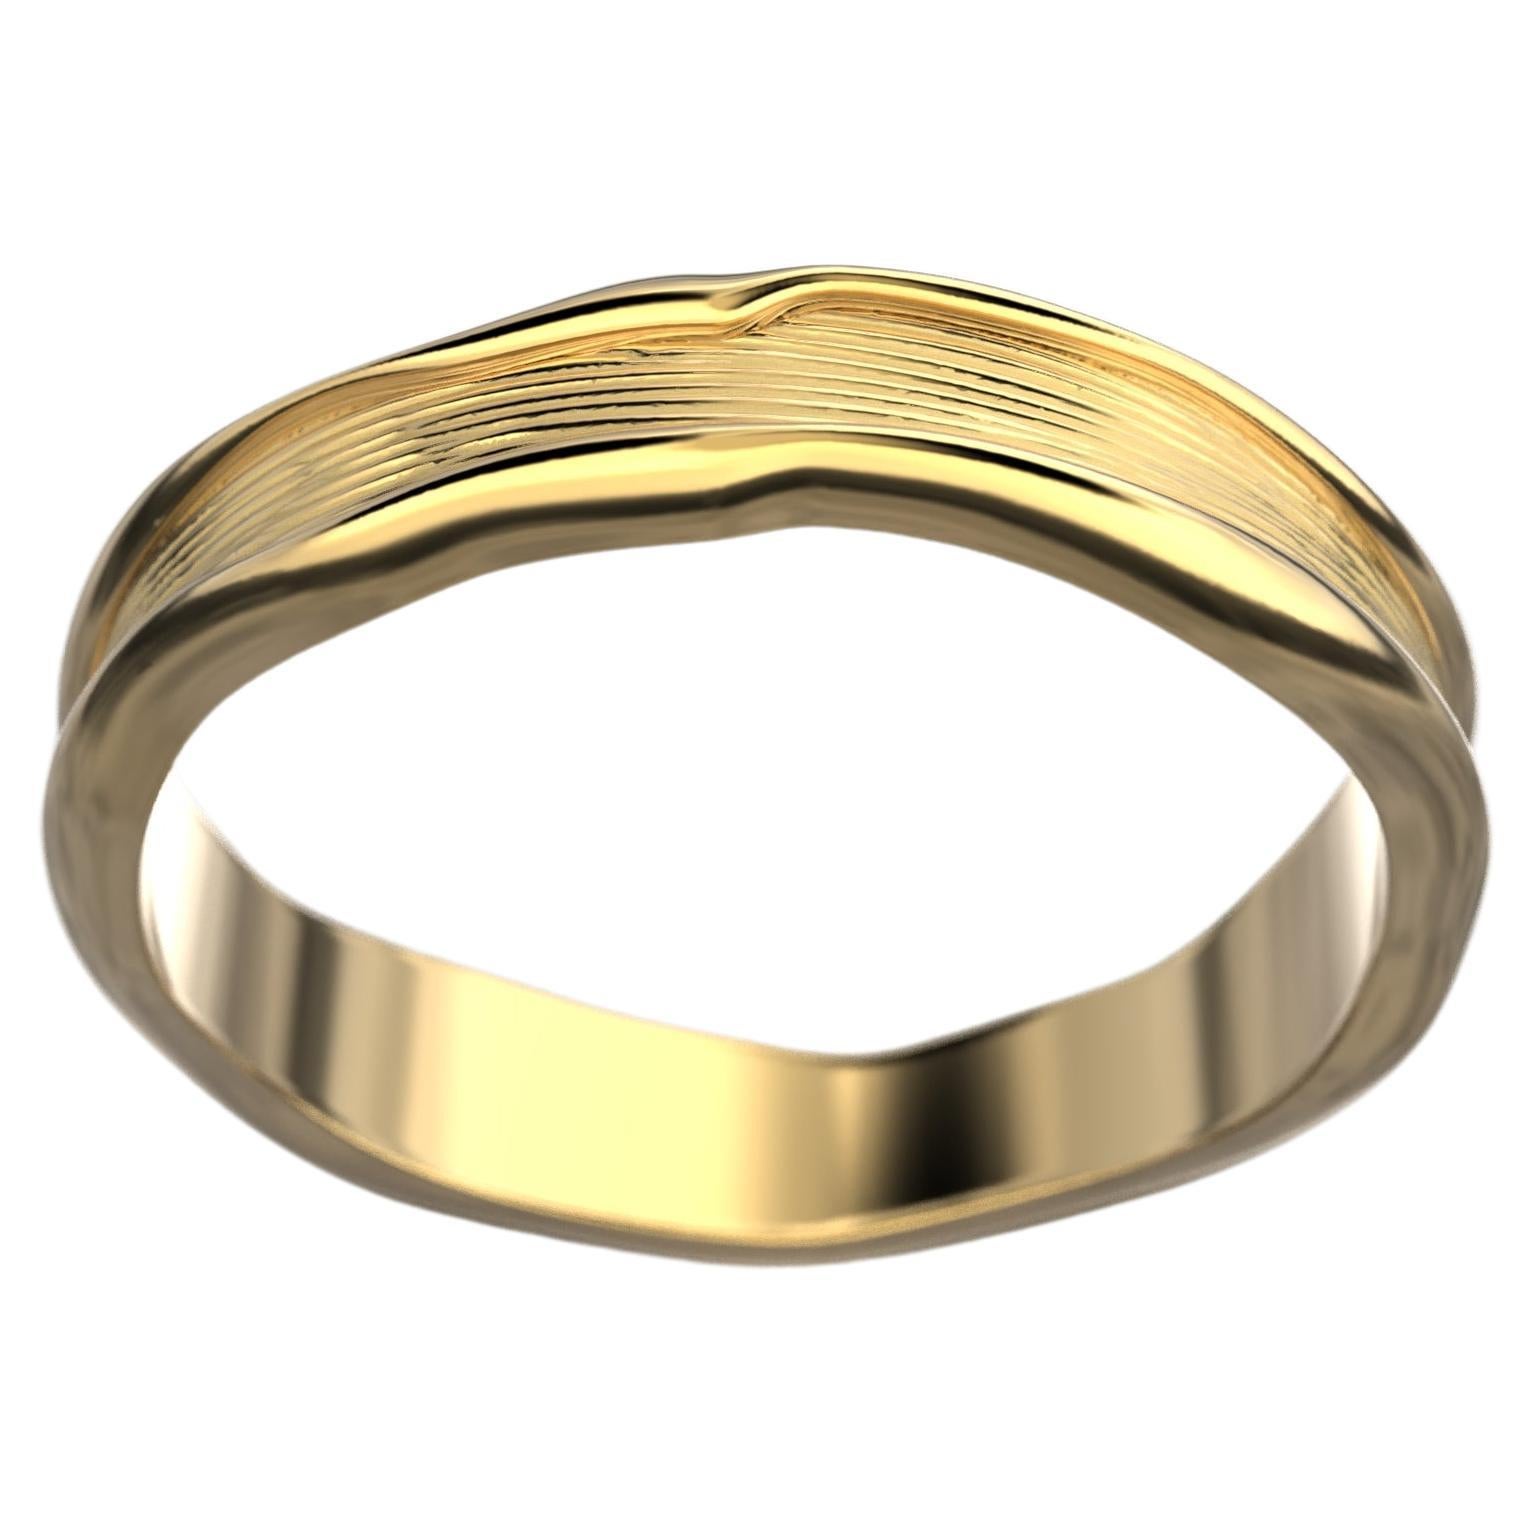 For Sale:  Florentine Finish Sophisticated Gold Wedding Band in 18k Made in Italy